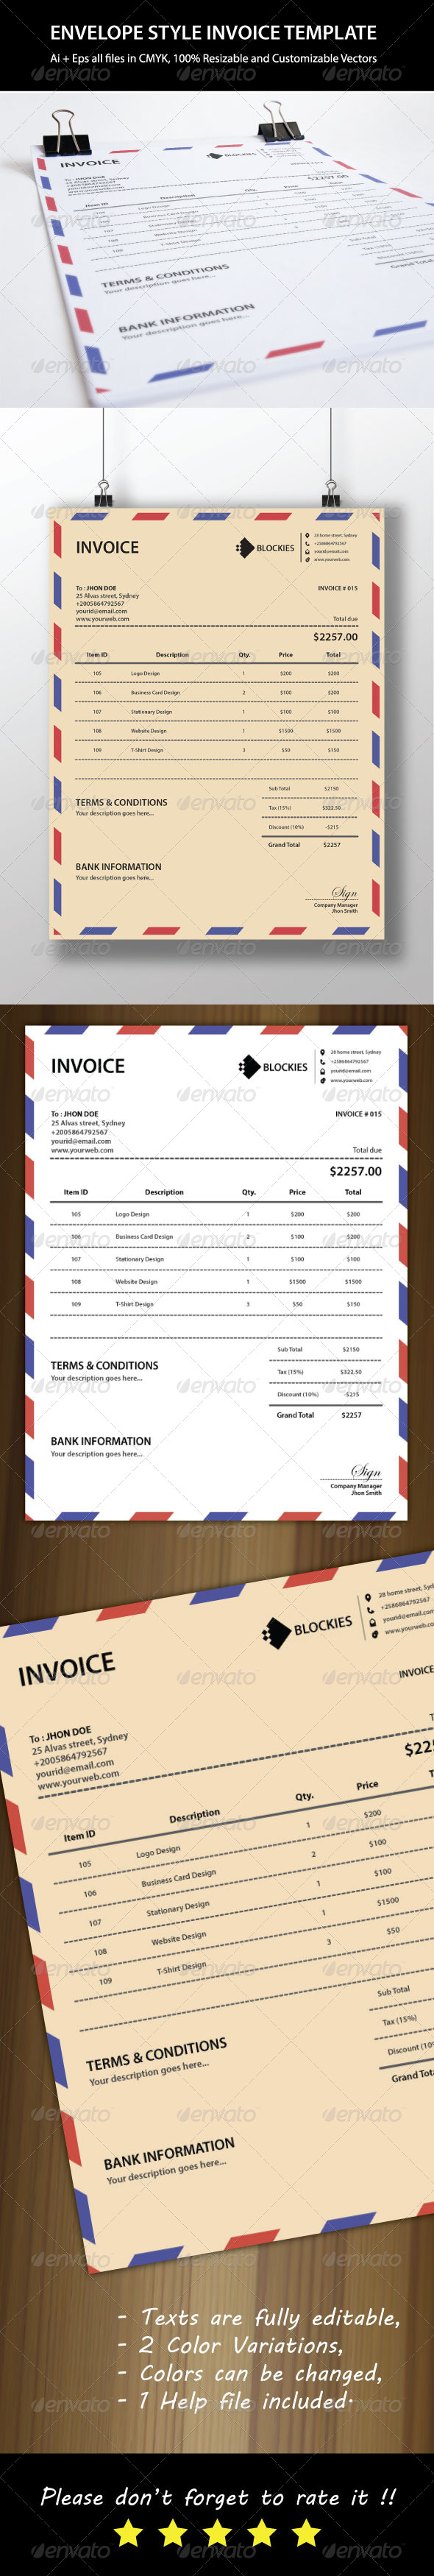 Mail Invoice Template